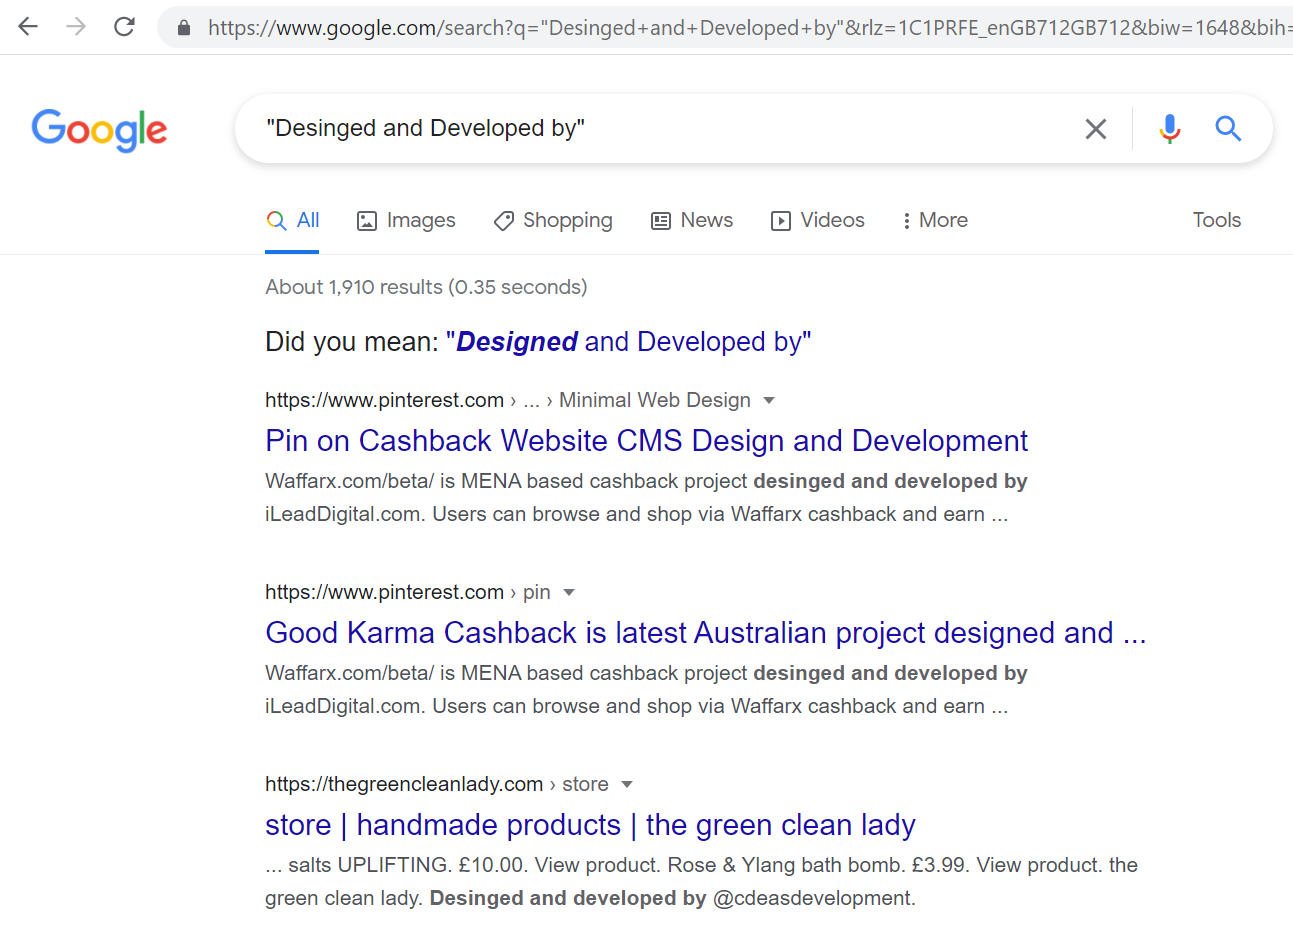 Copy Writing - Search Google for "Desinged and Developed by"